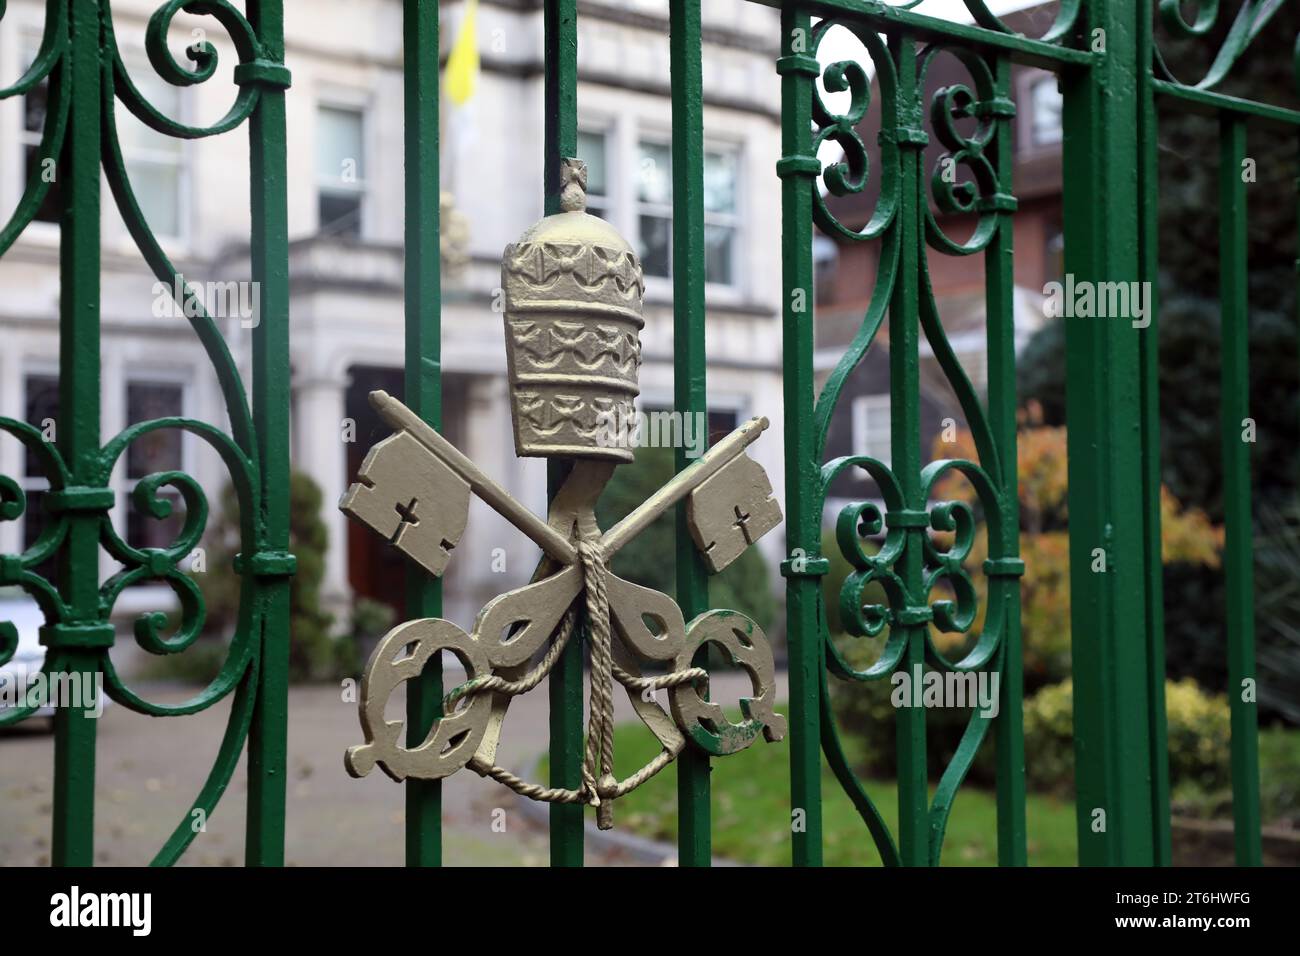 The Vatican’s coat of arms, on the gate of the Vatican’s embassy in the UK – officially the Apostolic Nunciature to Great Britain, in Wimbledon, Londo Stock Photo